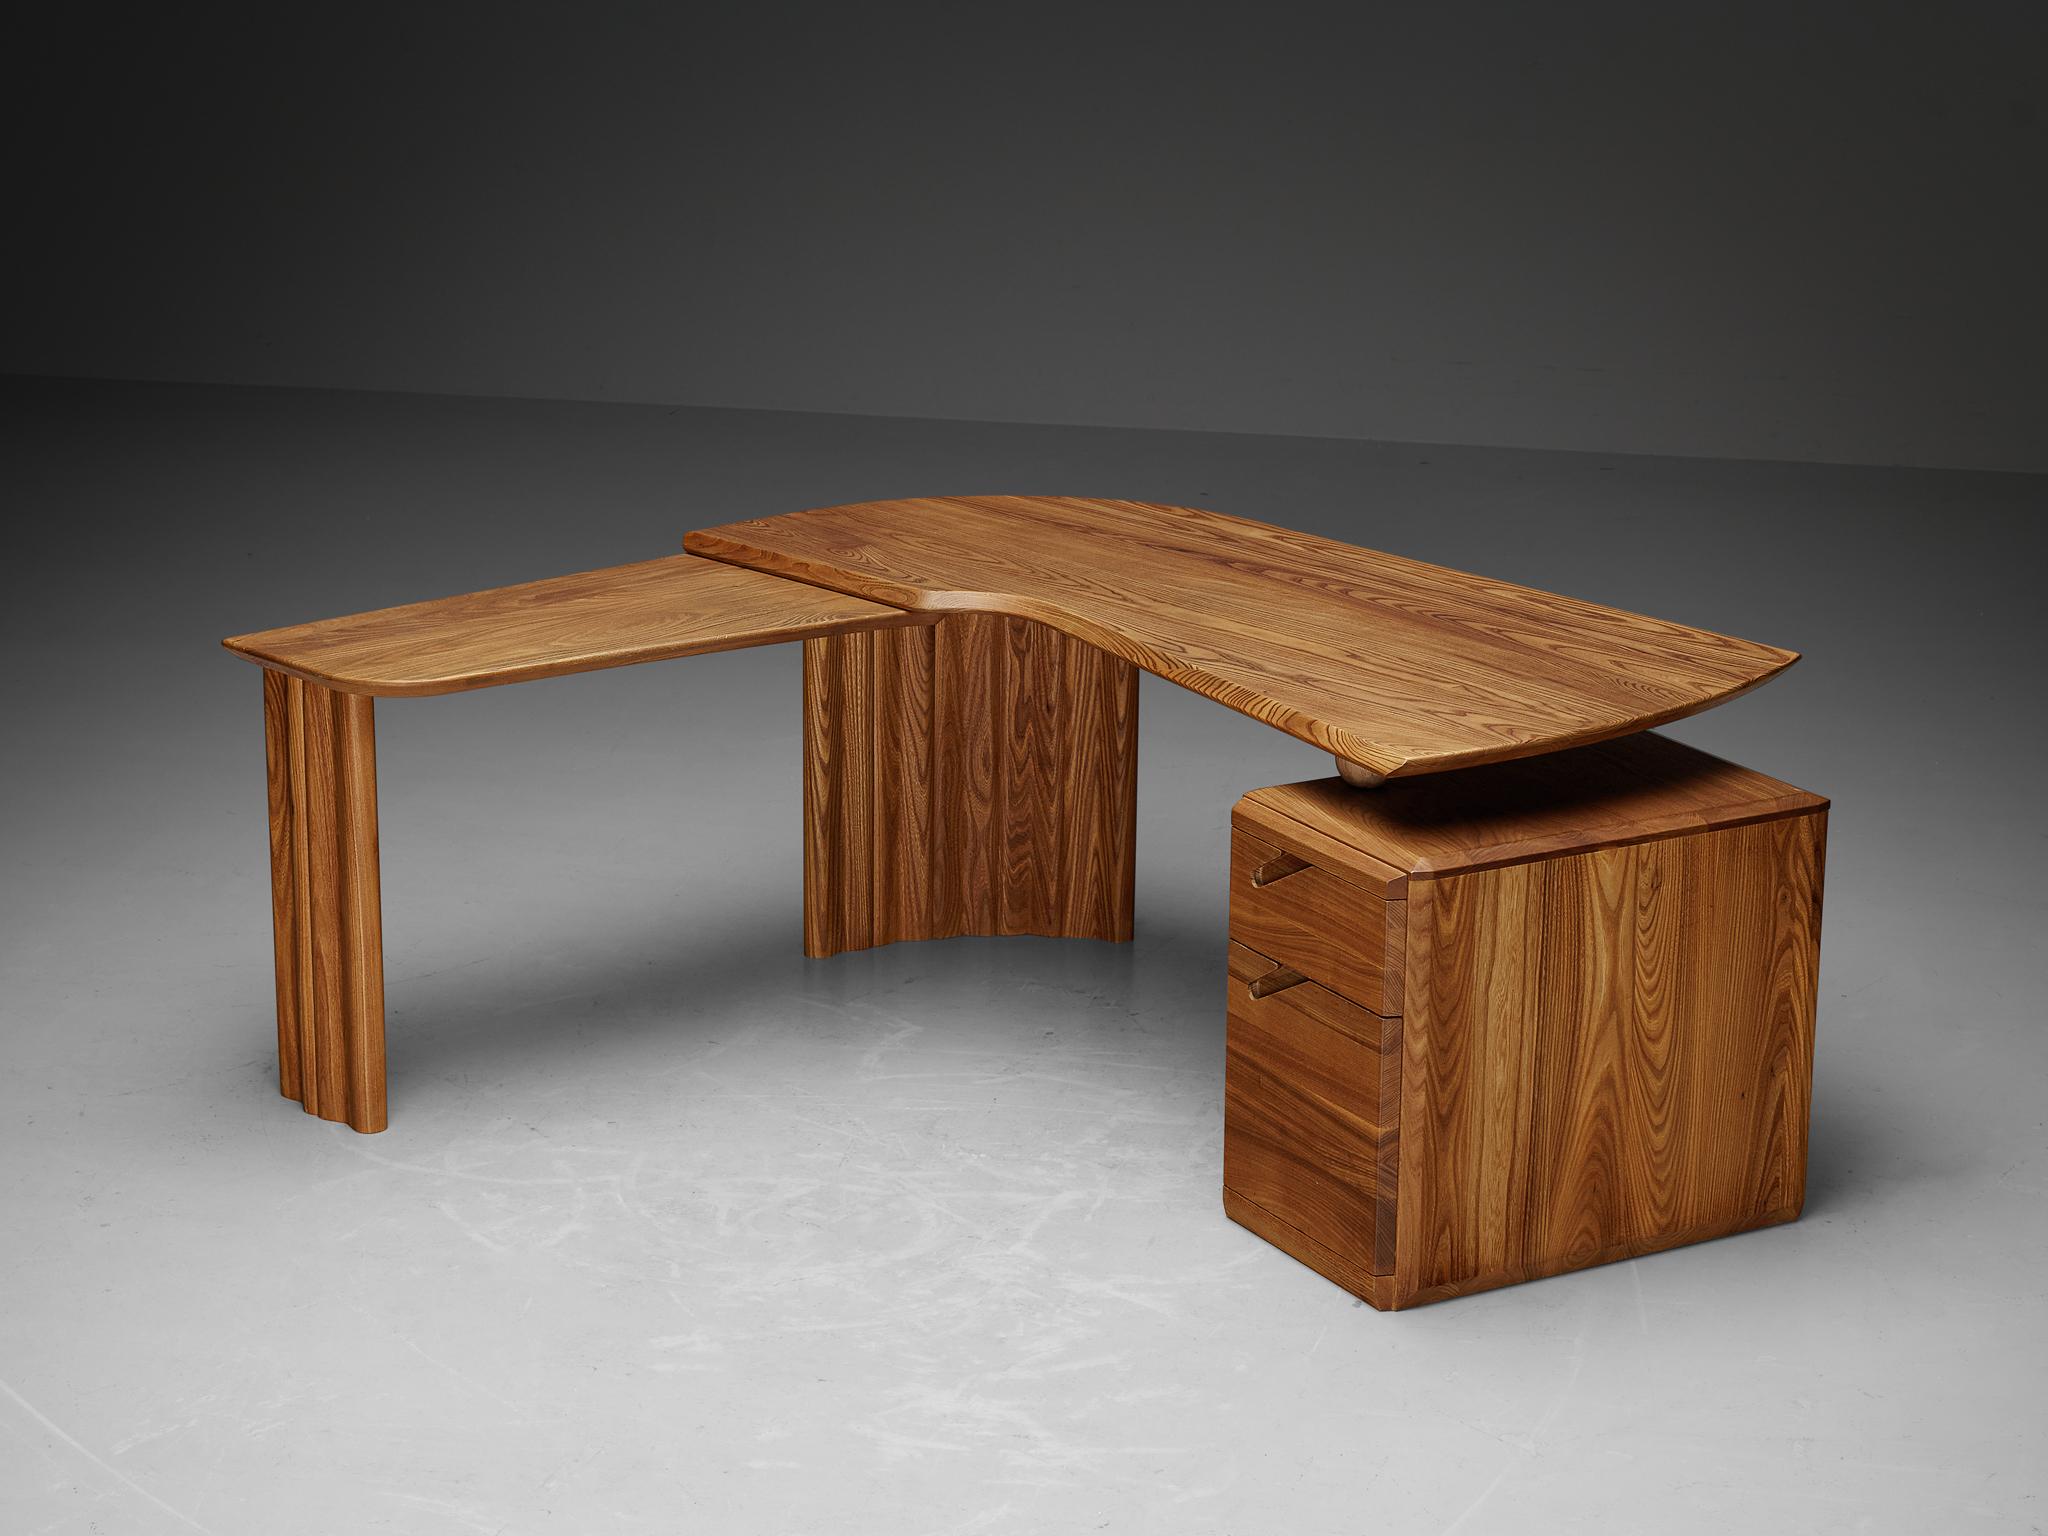 Ebénisterie Seltz, writing desk with return, solid elm, France, 1980s

Situated in a small French region Alsace, Ebénisterie Seltz gained prominence as a workshop recognized for crafting, among others, Pierre Chapo's designs in the 1970s and 1980s.